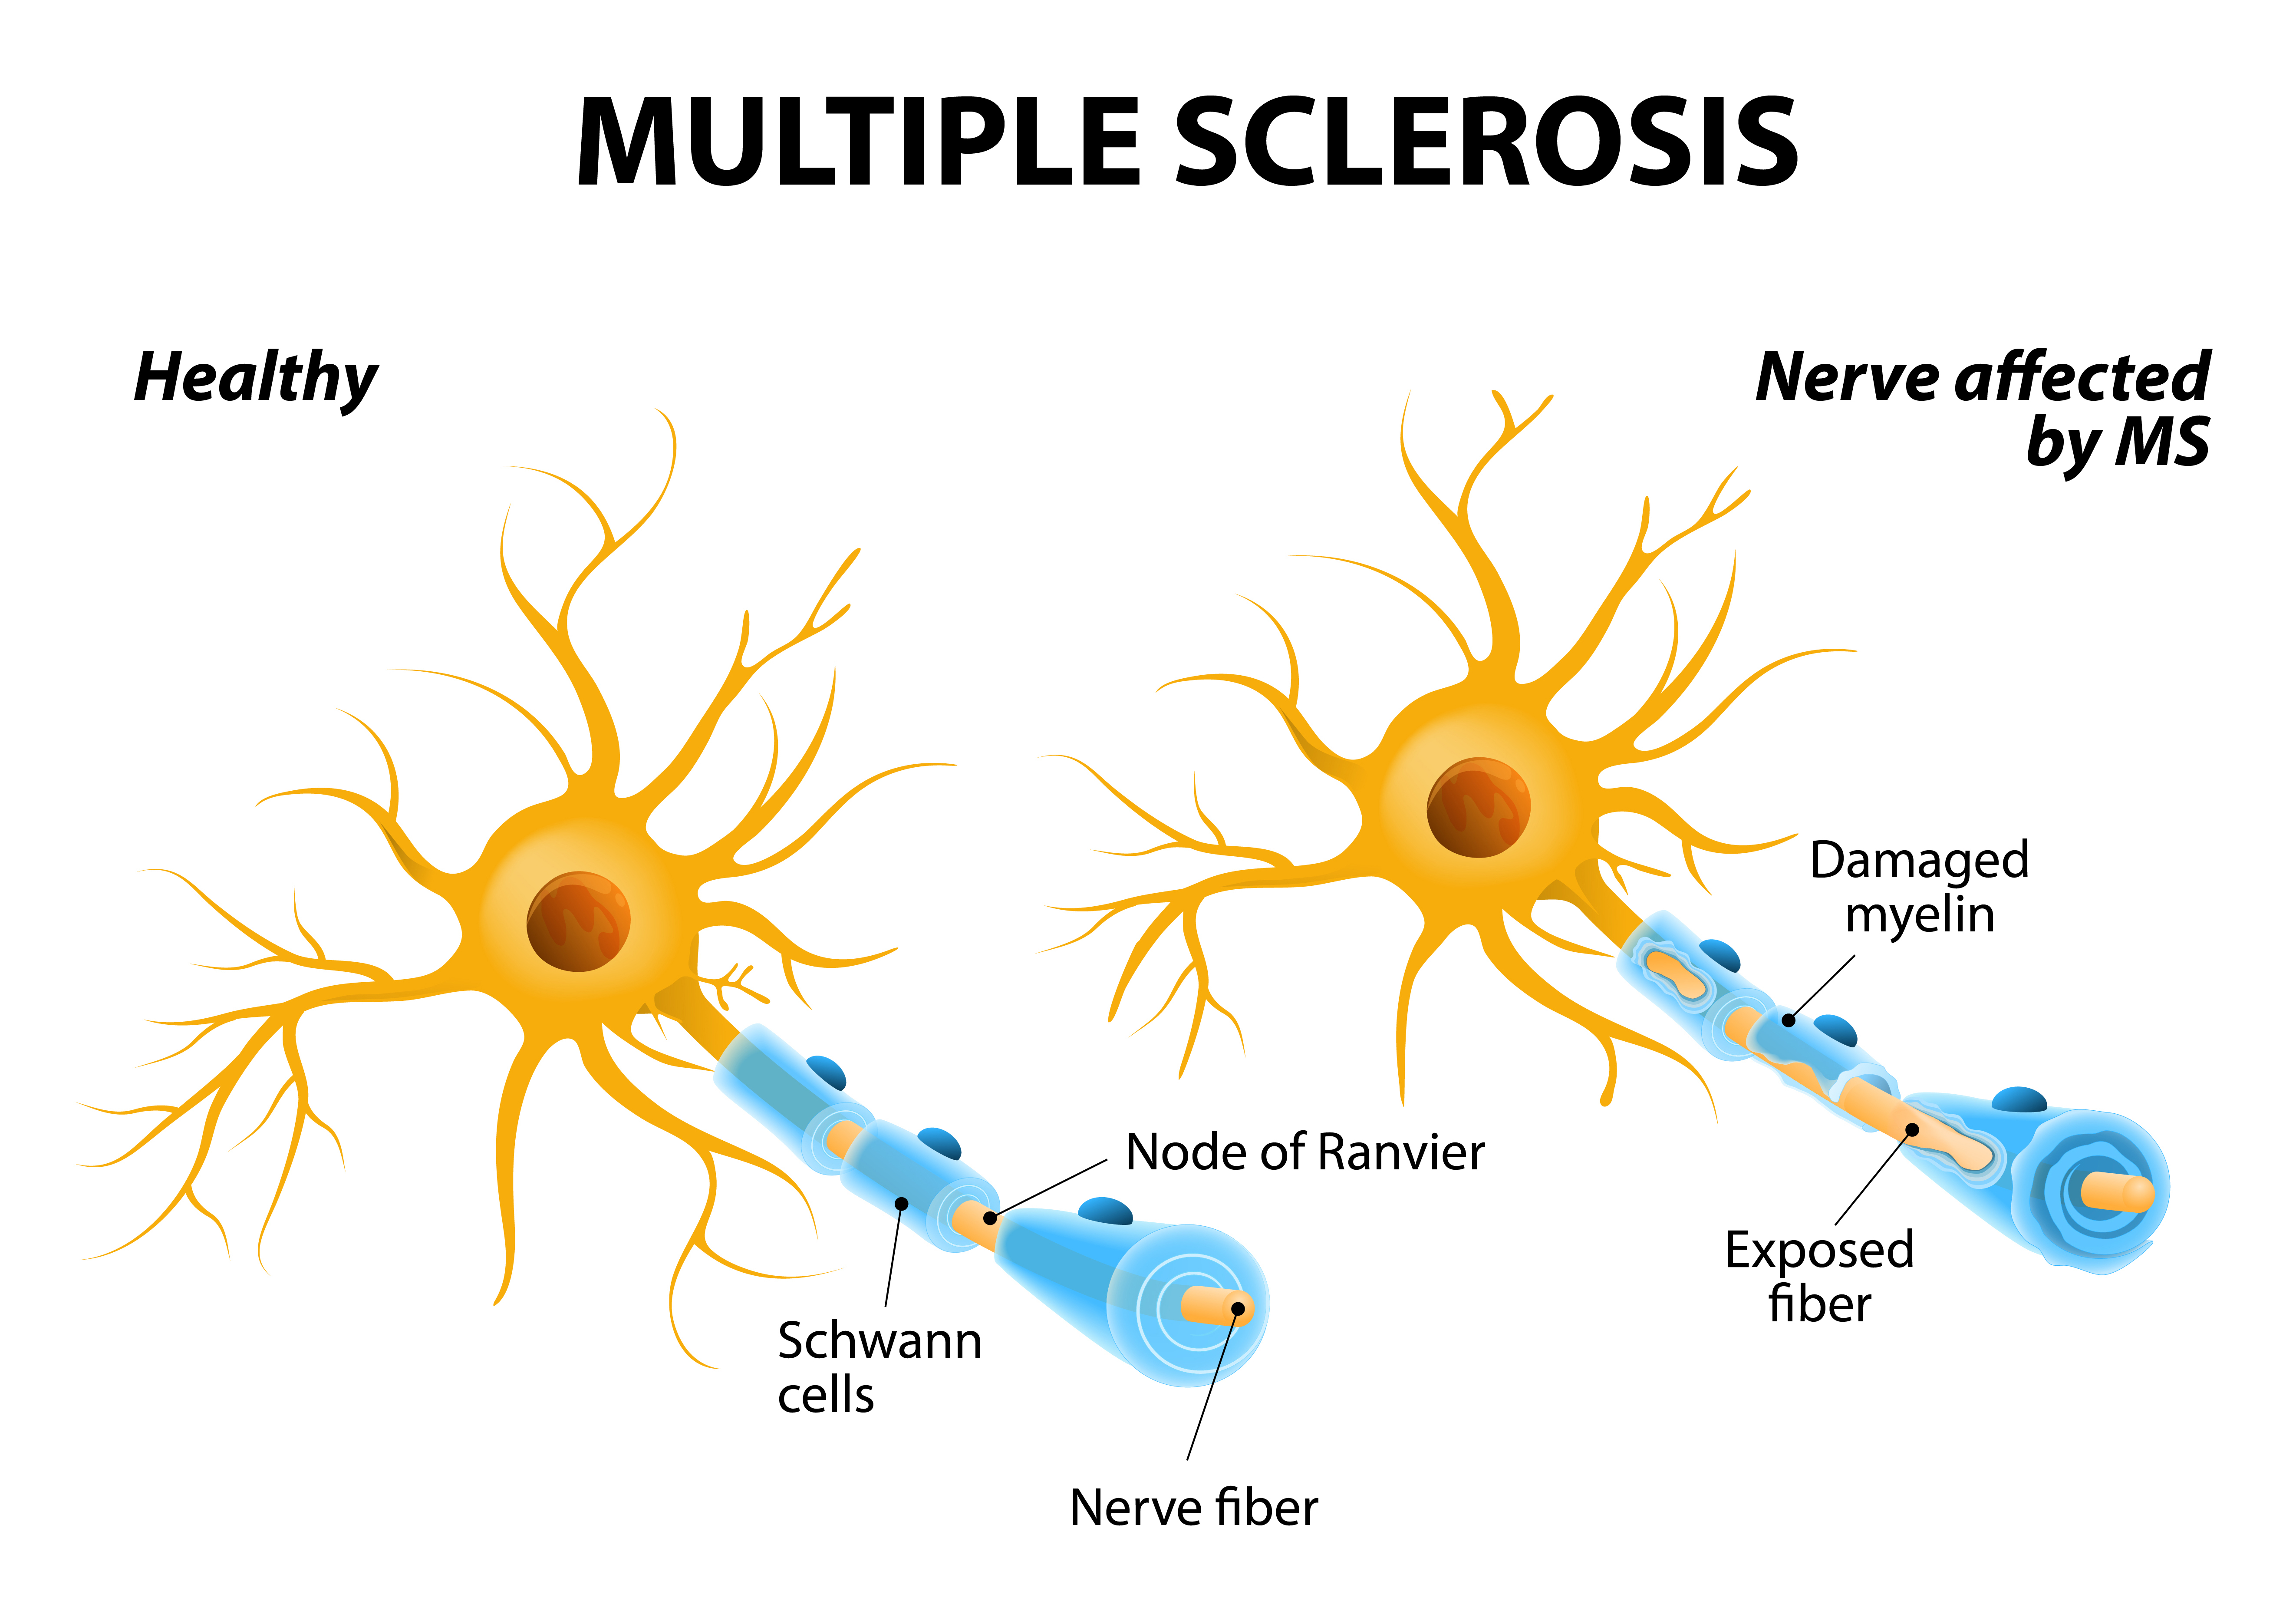 How multiple sclerosis affects nerve cells